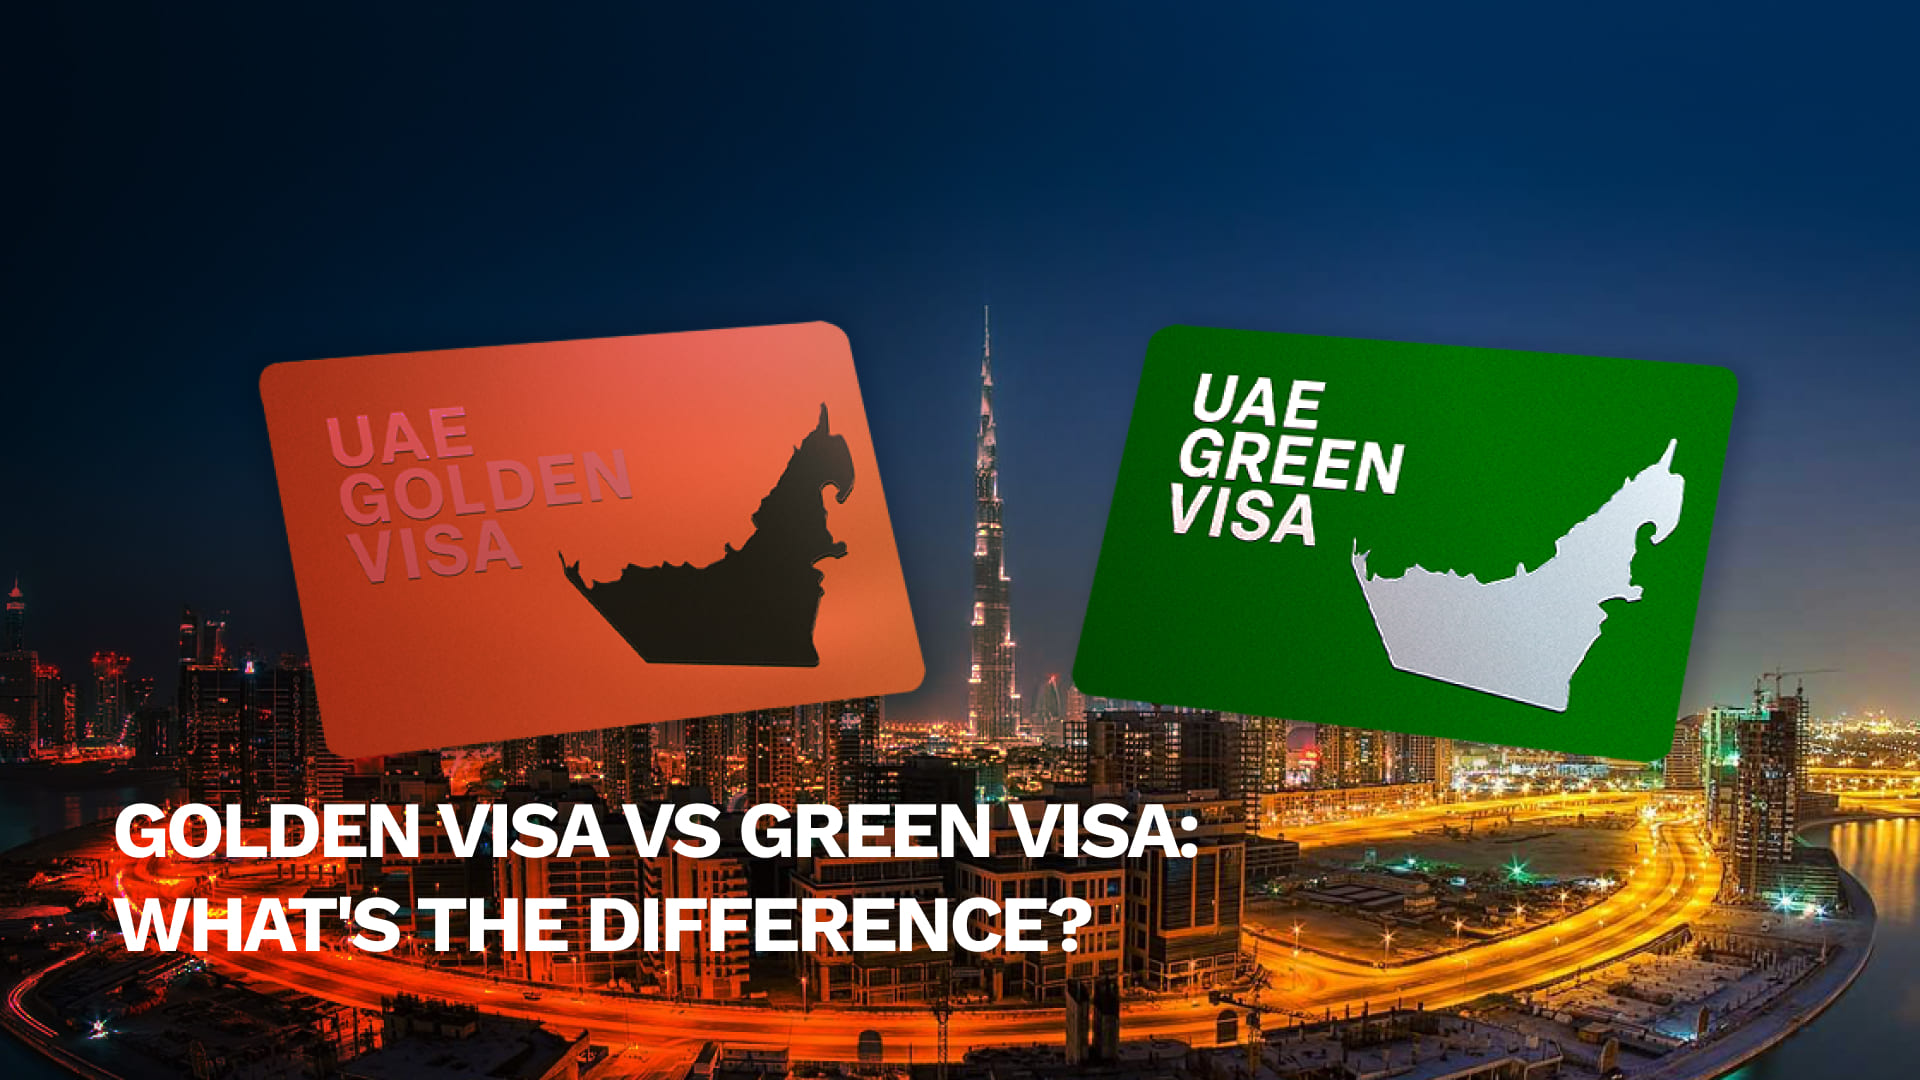 Golden Visa vs Green Visa: What's the Difference?